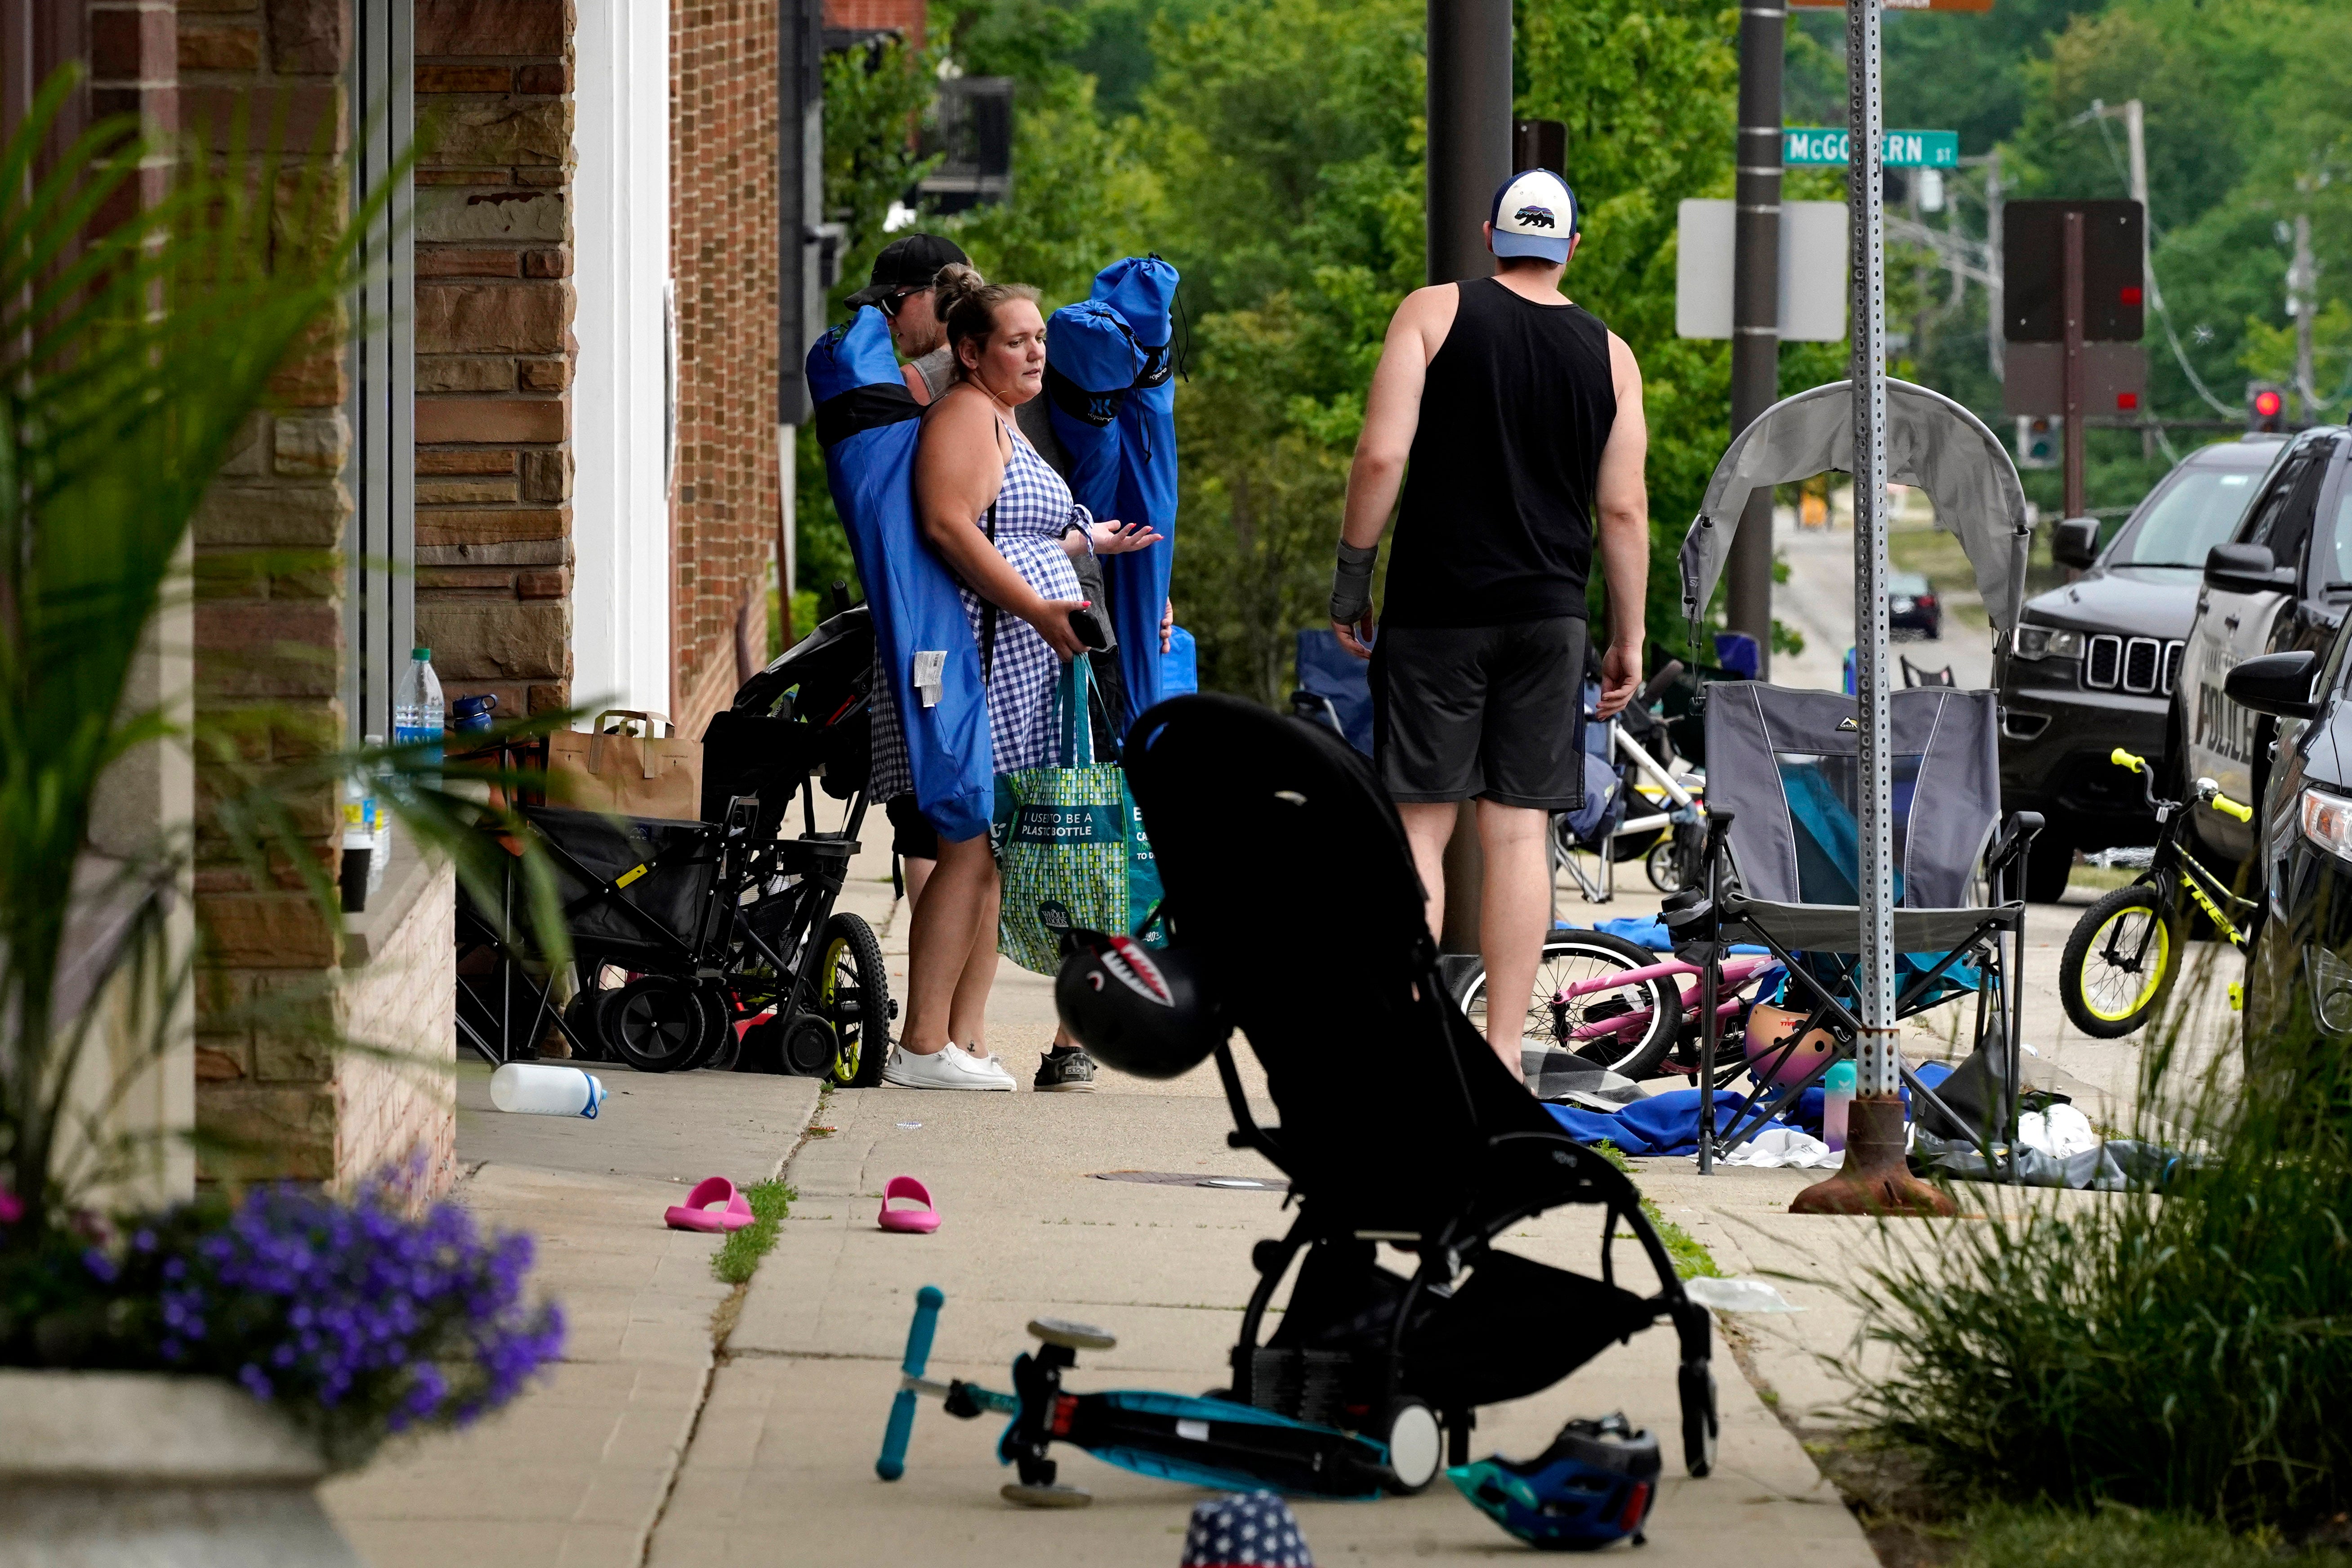 People return to their belongings in the aftermath of the shooting